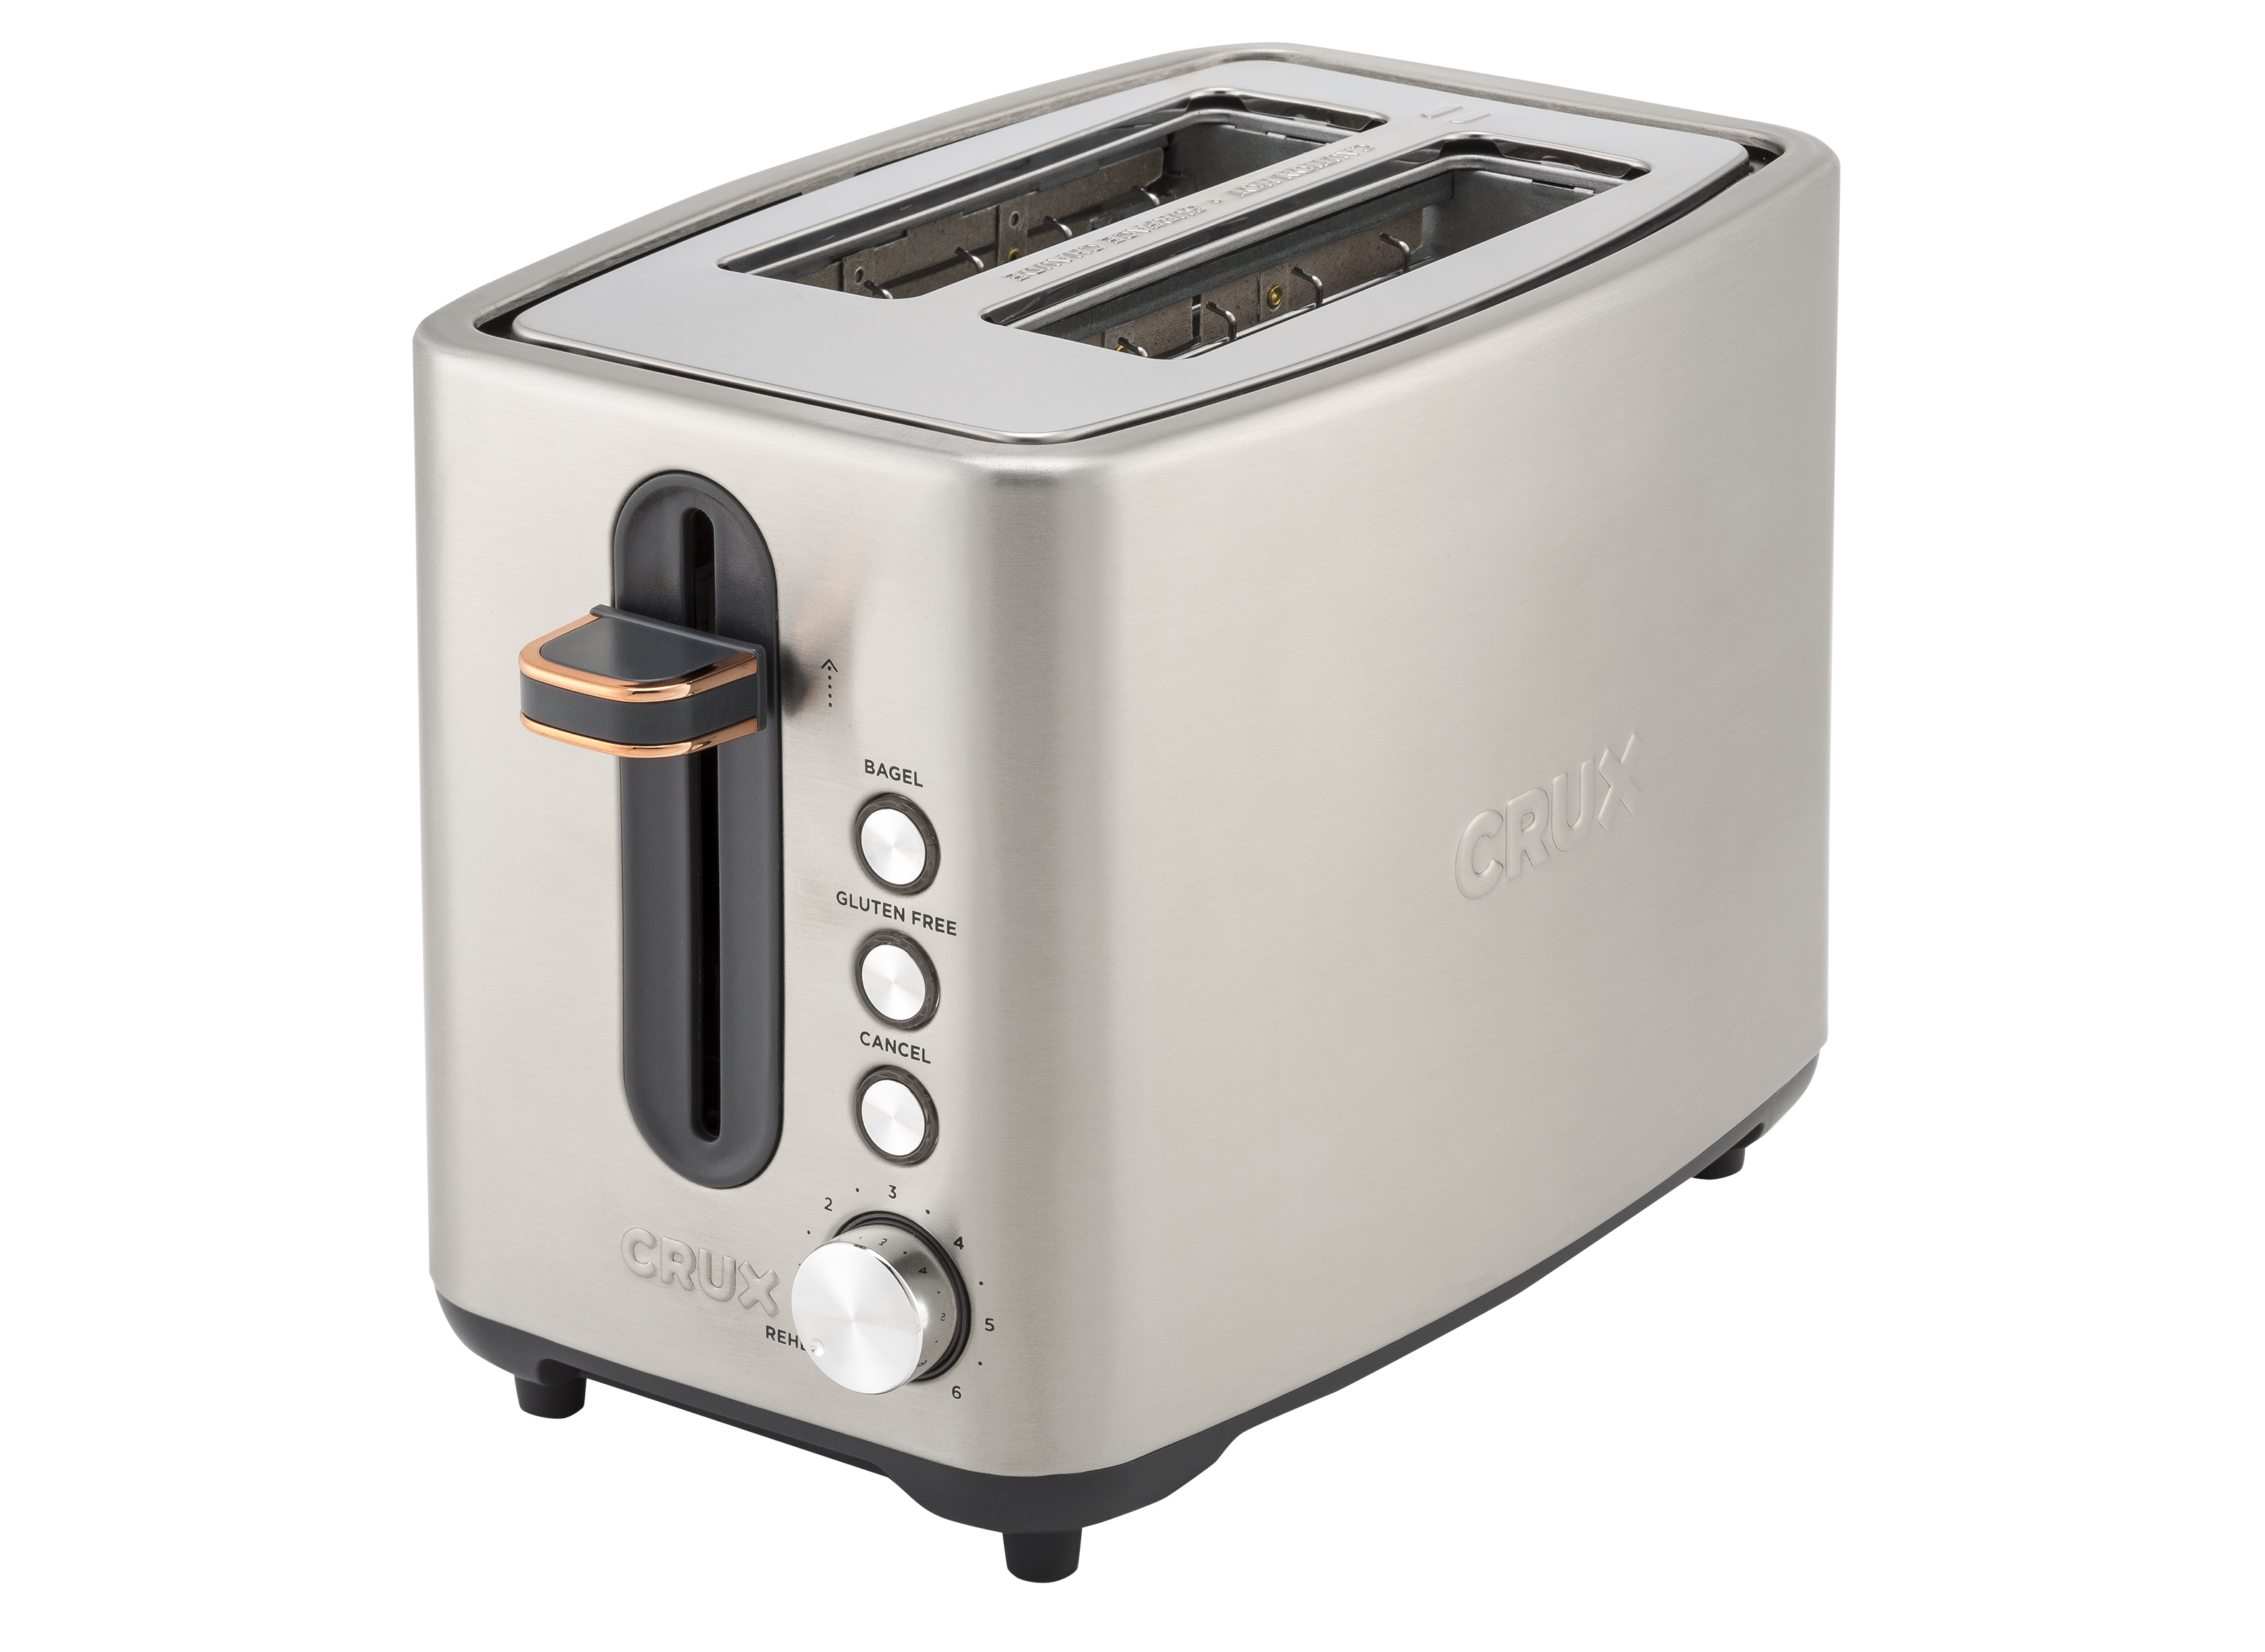 https://crdms.images.consumerreports.org/prod/products/cr/models/387710-toasters-crux-crx145442slice.png